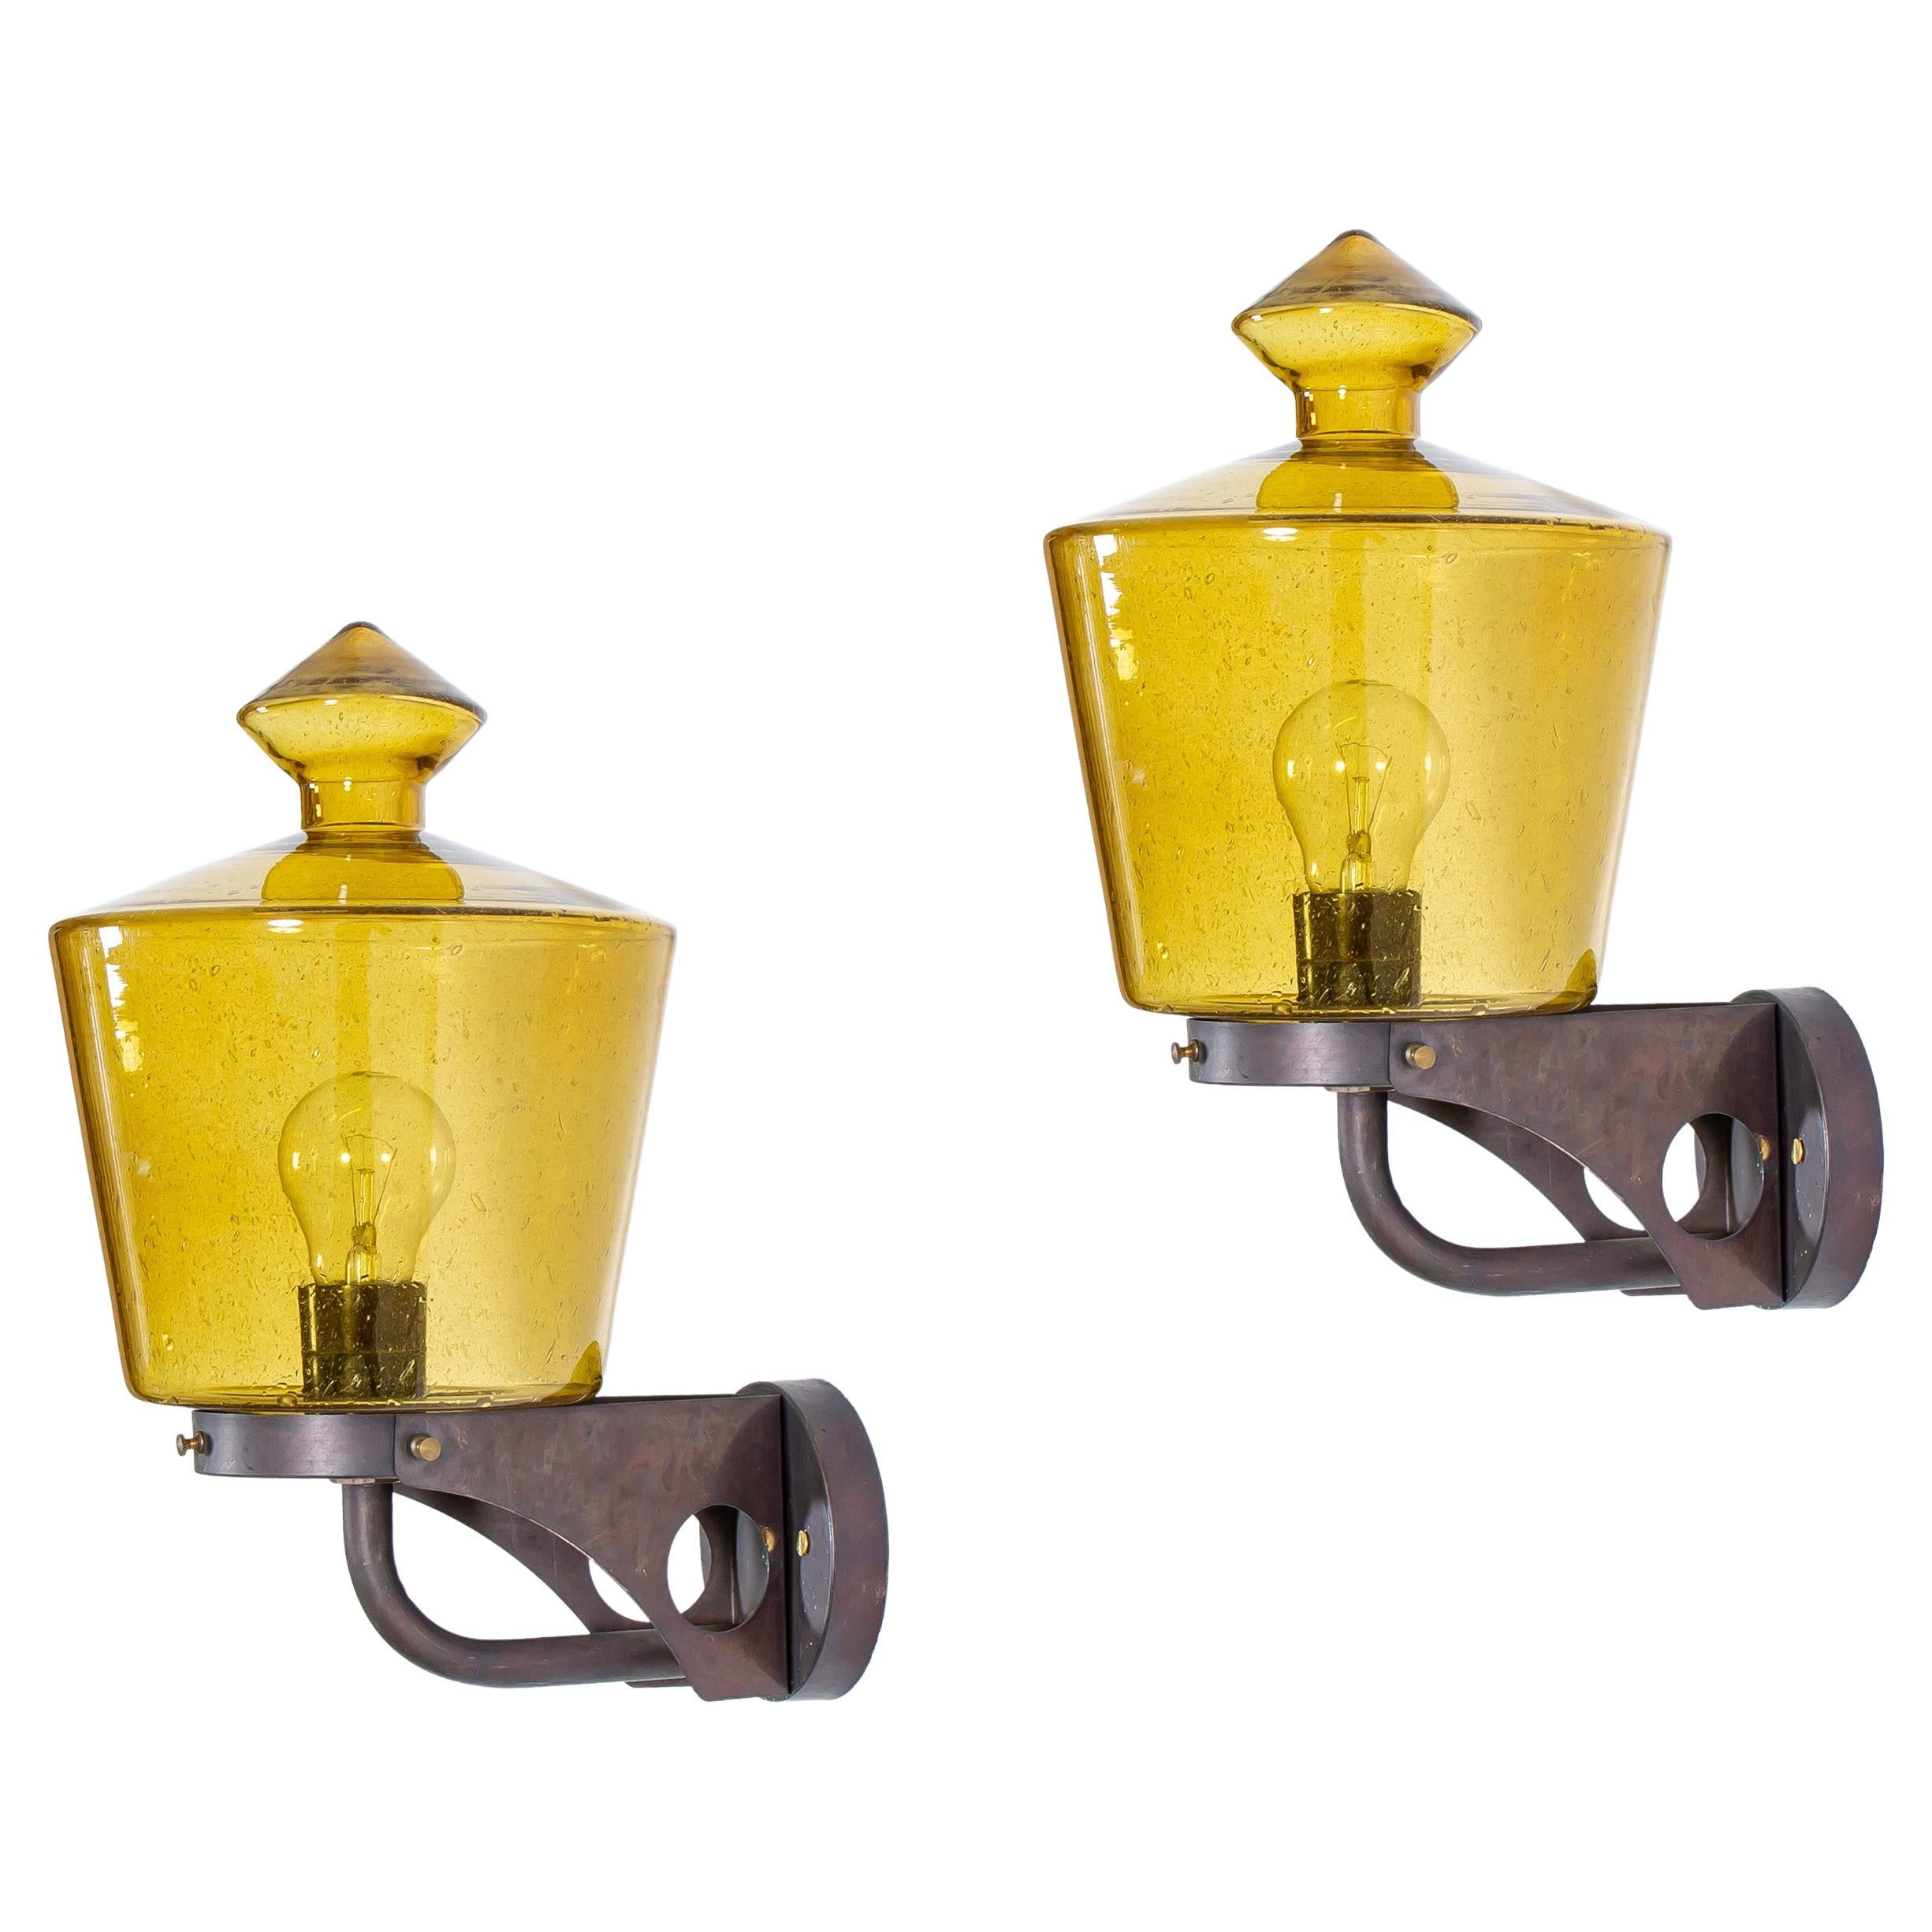 Pair of Outdoor Wall Lights in Copper, Norway, 1960s For Sale